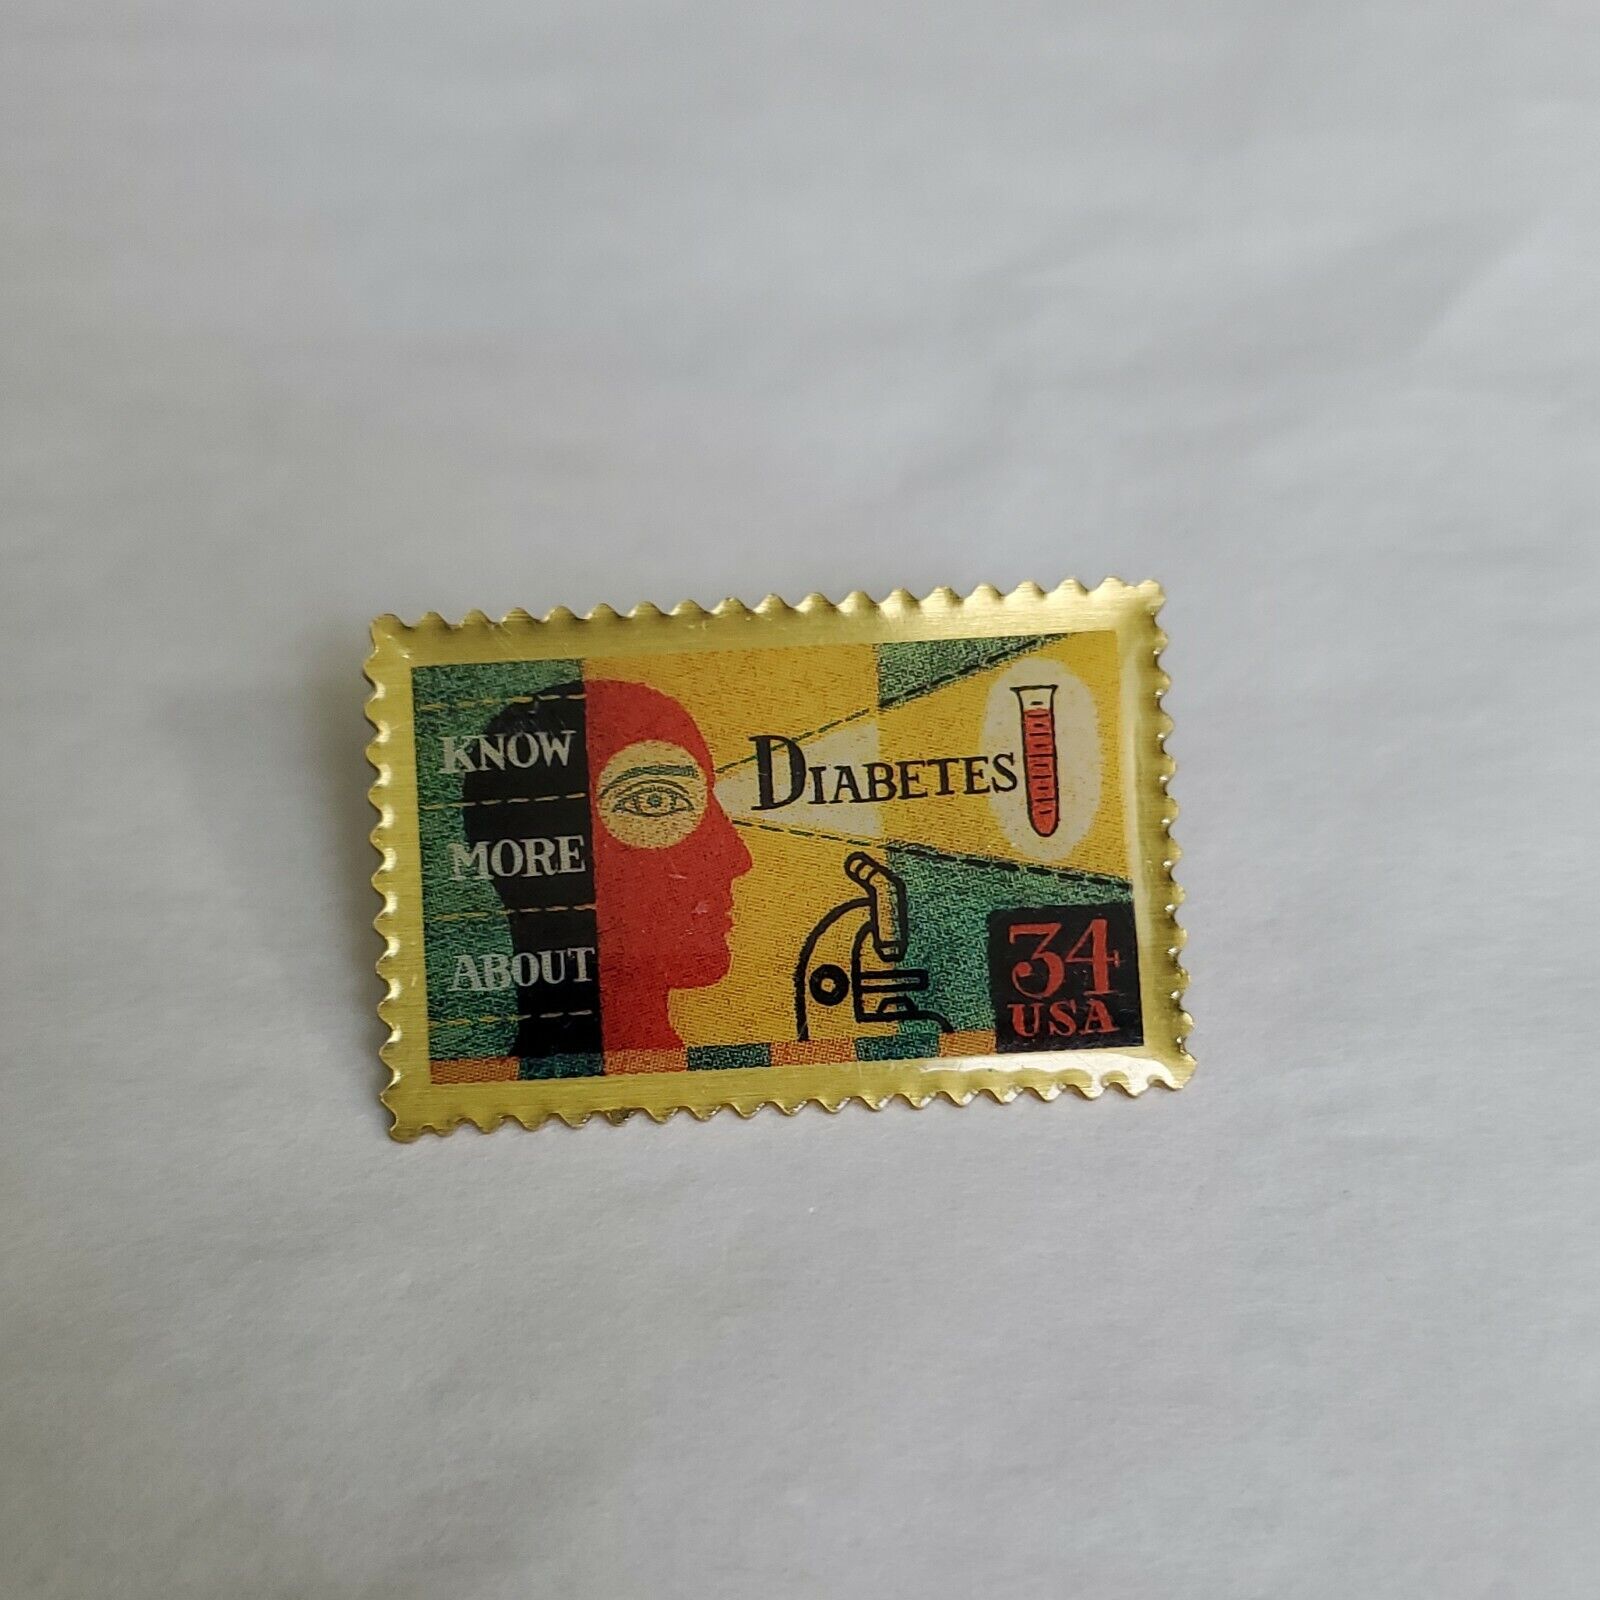 Know More About Diabetes 34 Cent USA Stamp  Lapel Hat Jacket Pin